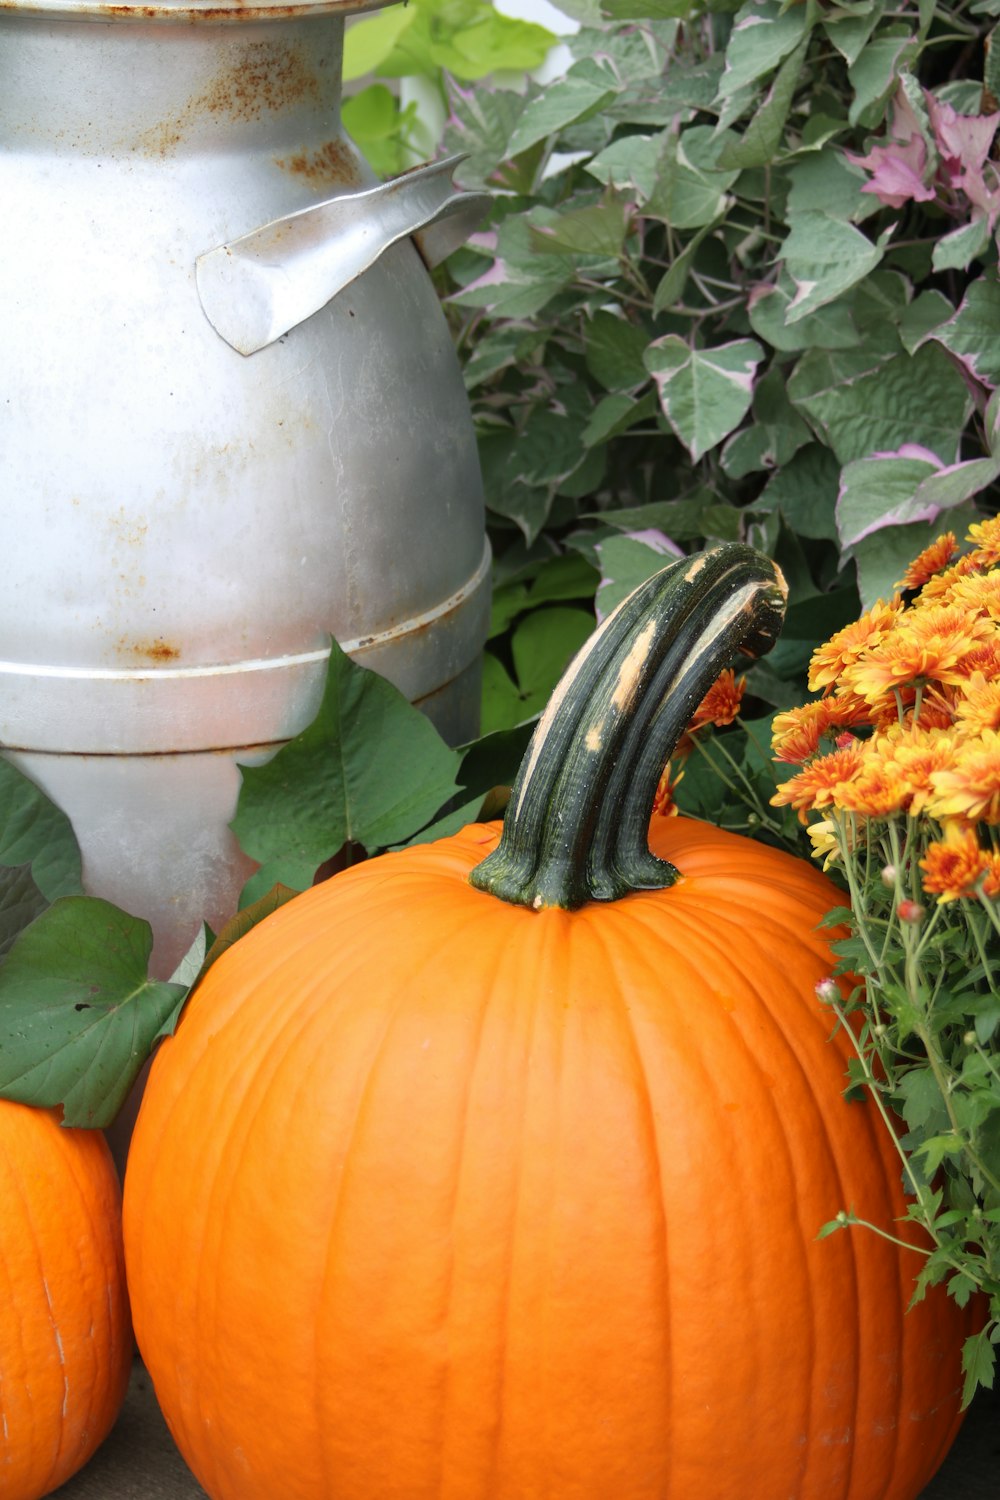 a couple of pumpkins sitting next to a watering can